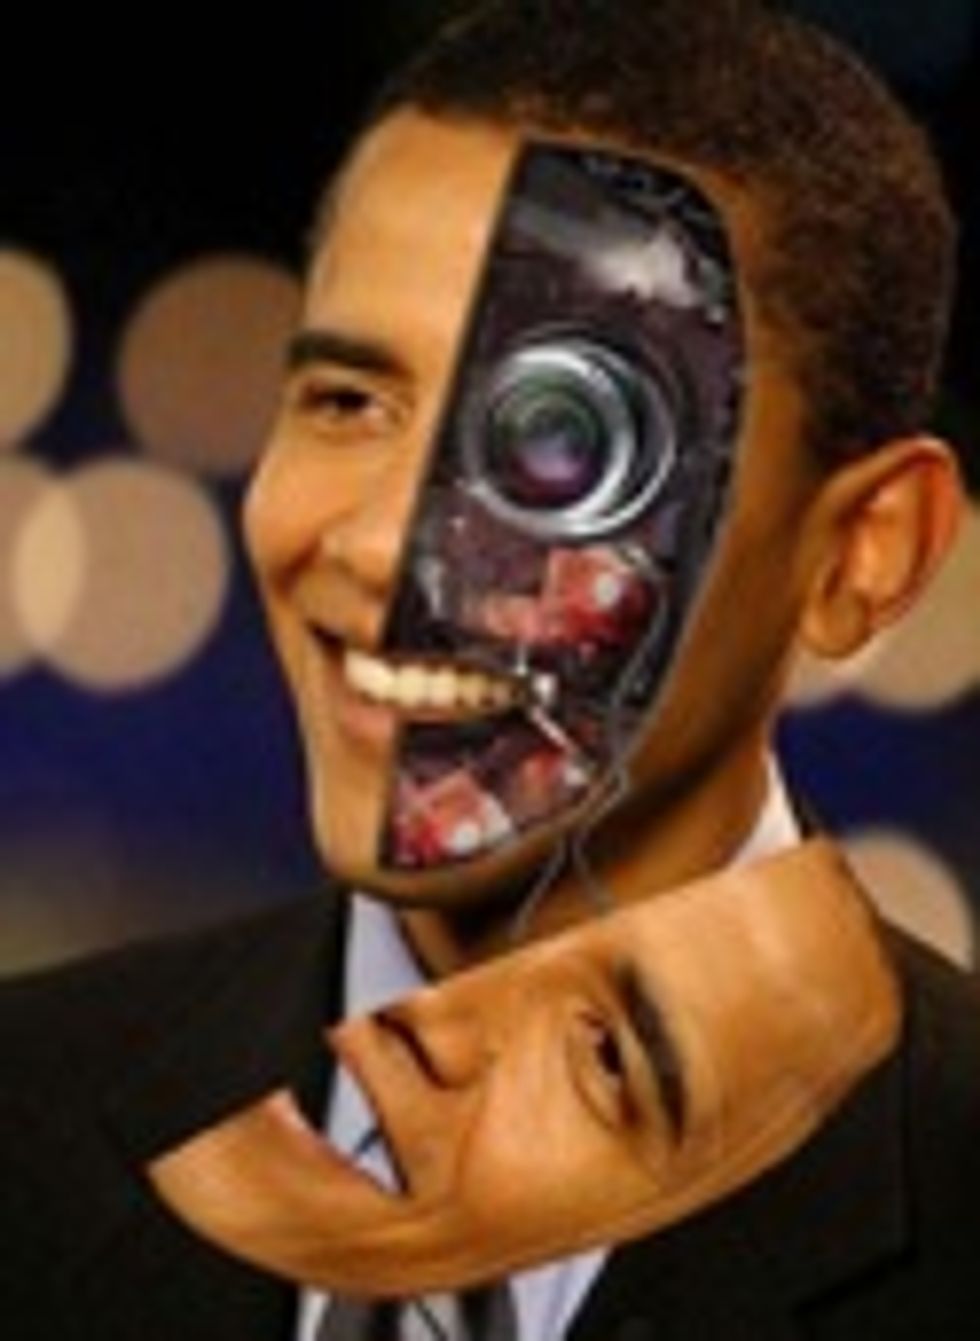 Obama Really Is Just A Talking Robot